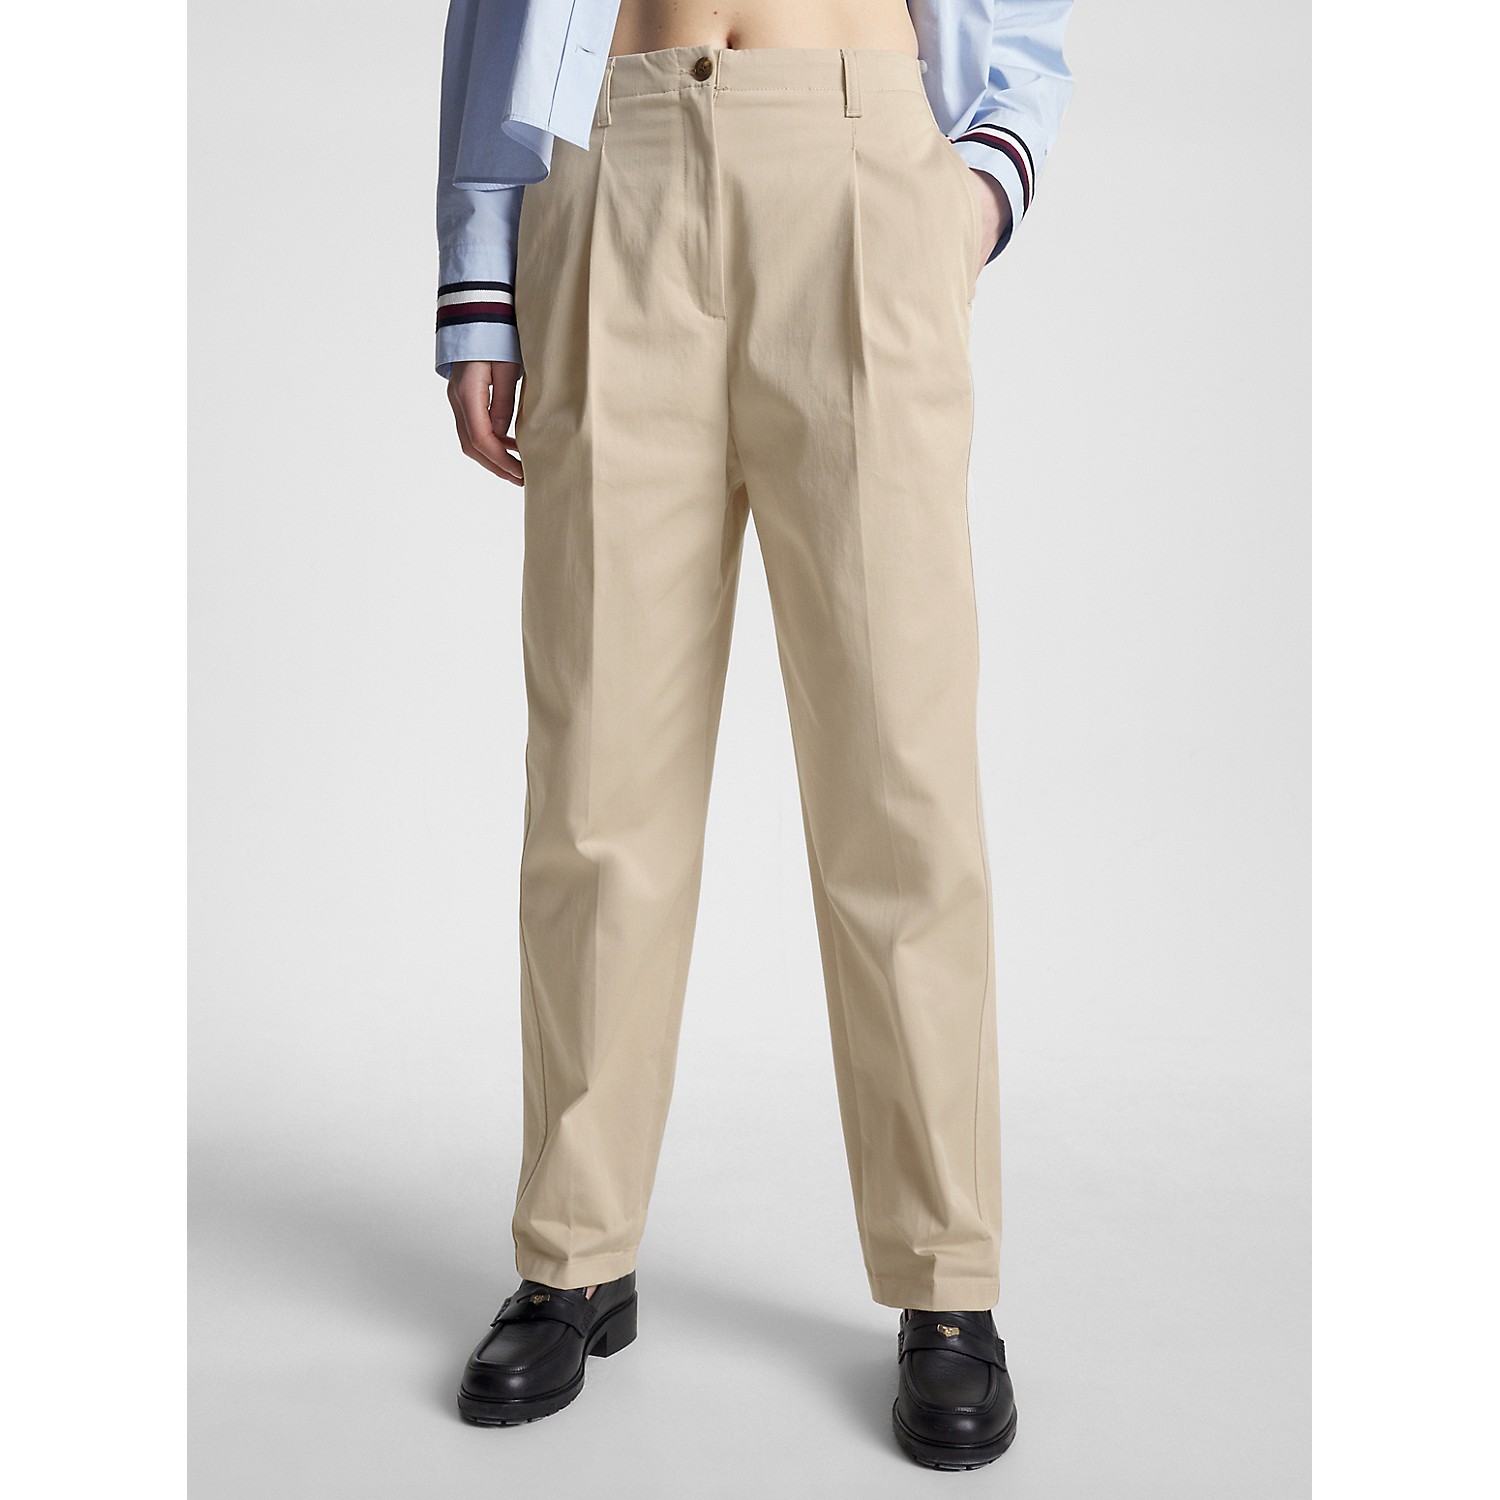 TOMMY HILFIGER Tapered Pleated Chino Pant